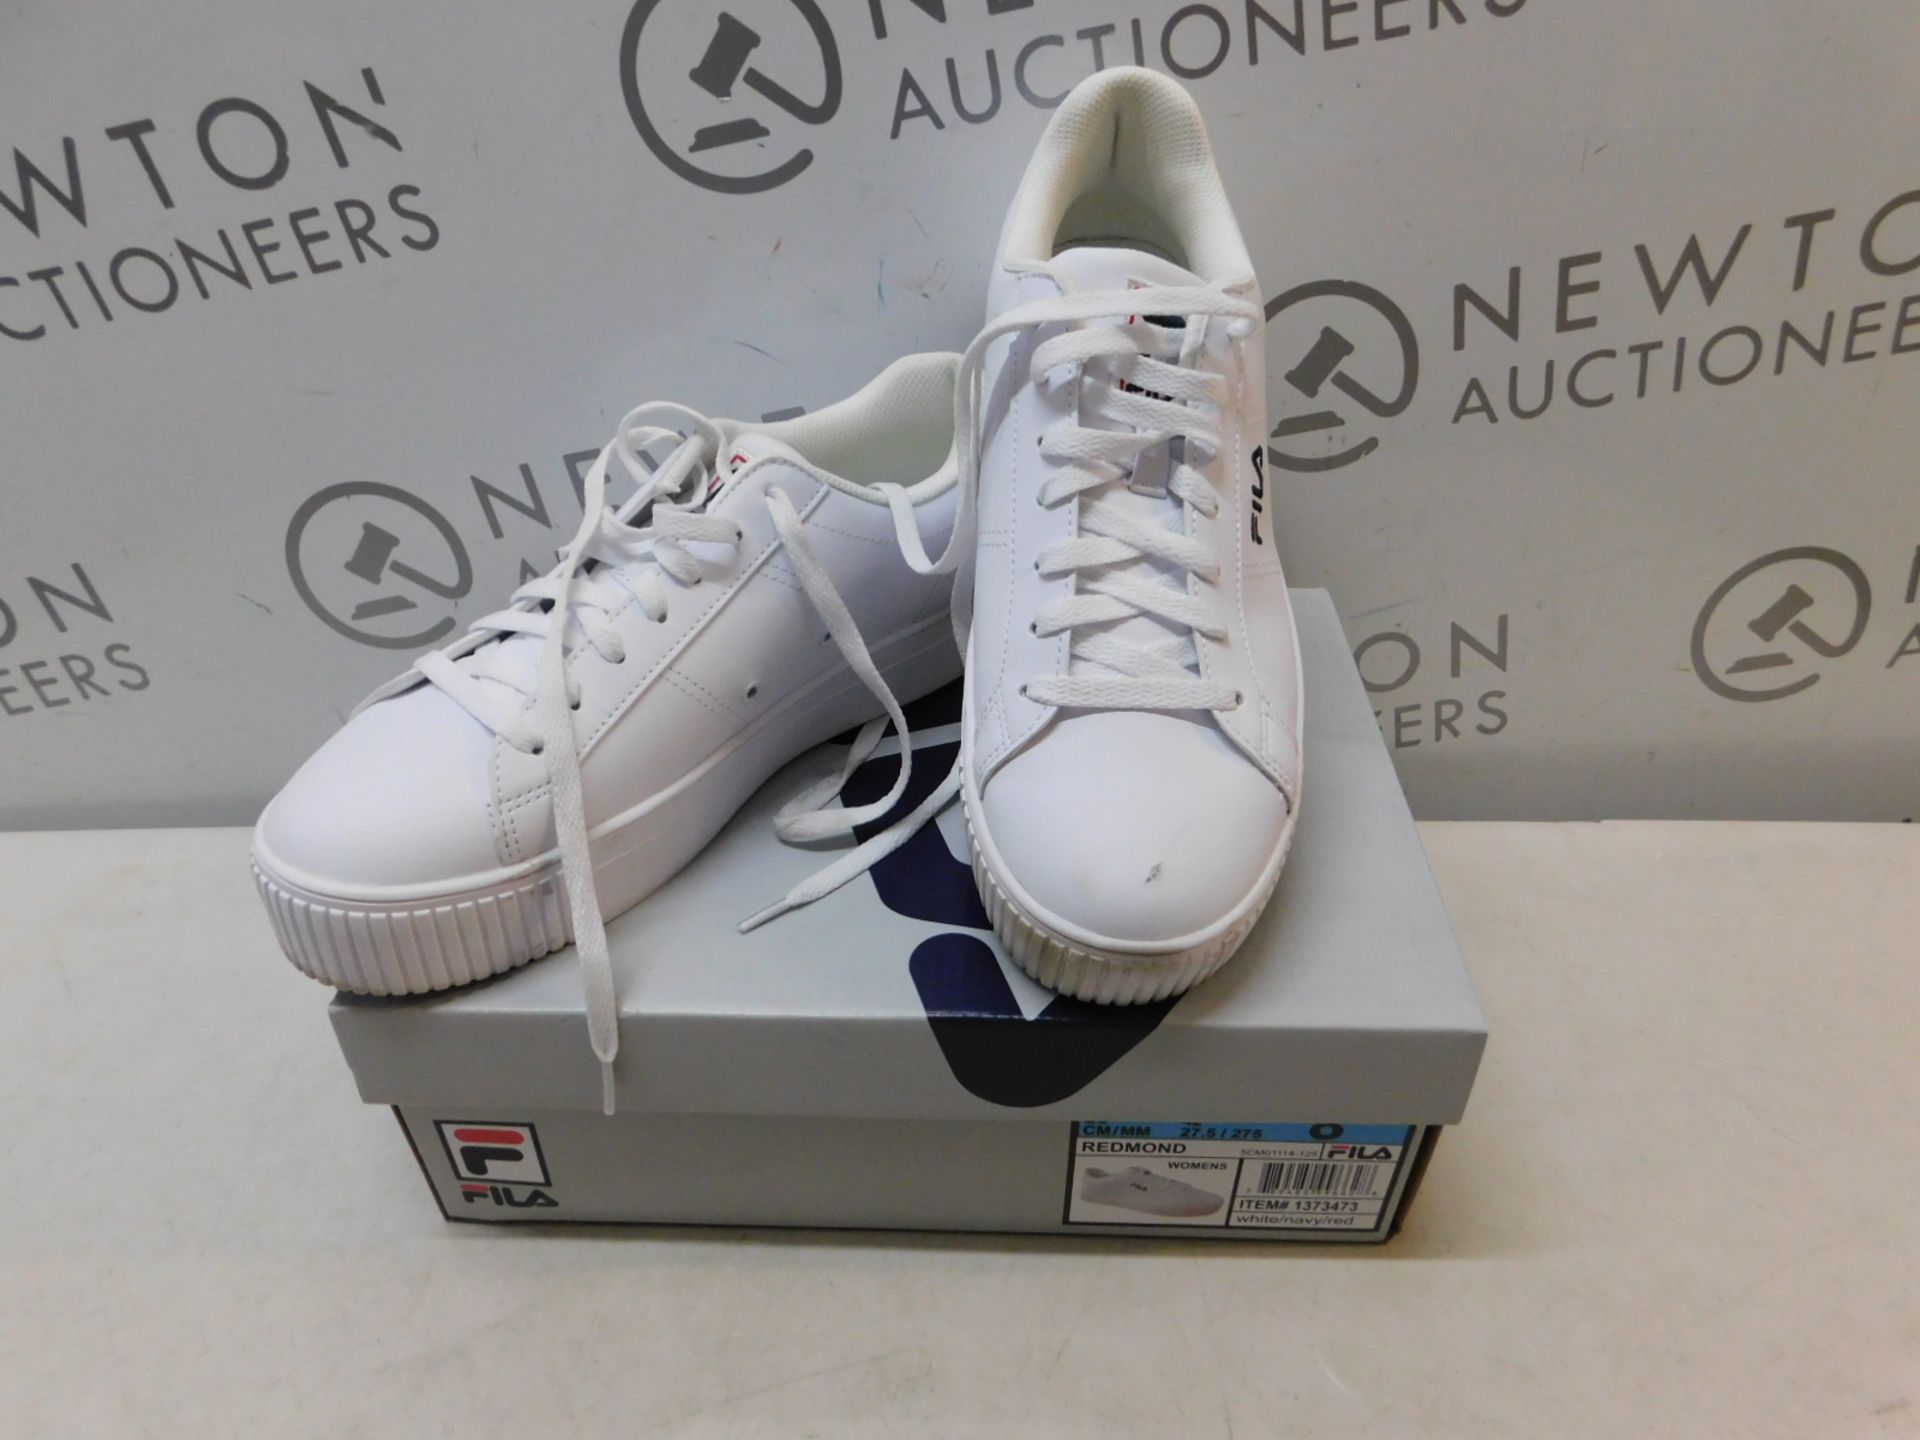 1 BOXED PAIR OF WOMENS FILA REDMOND TRAINERS UK SIZE 8 RRP Â£39